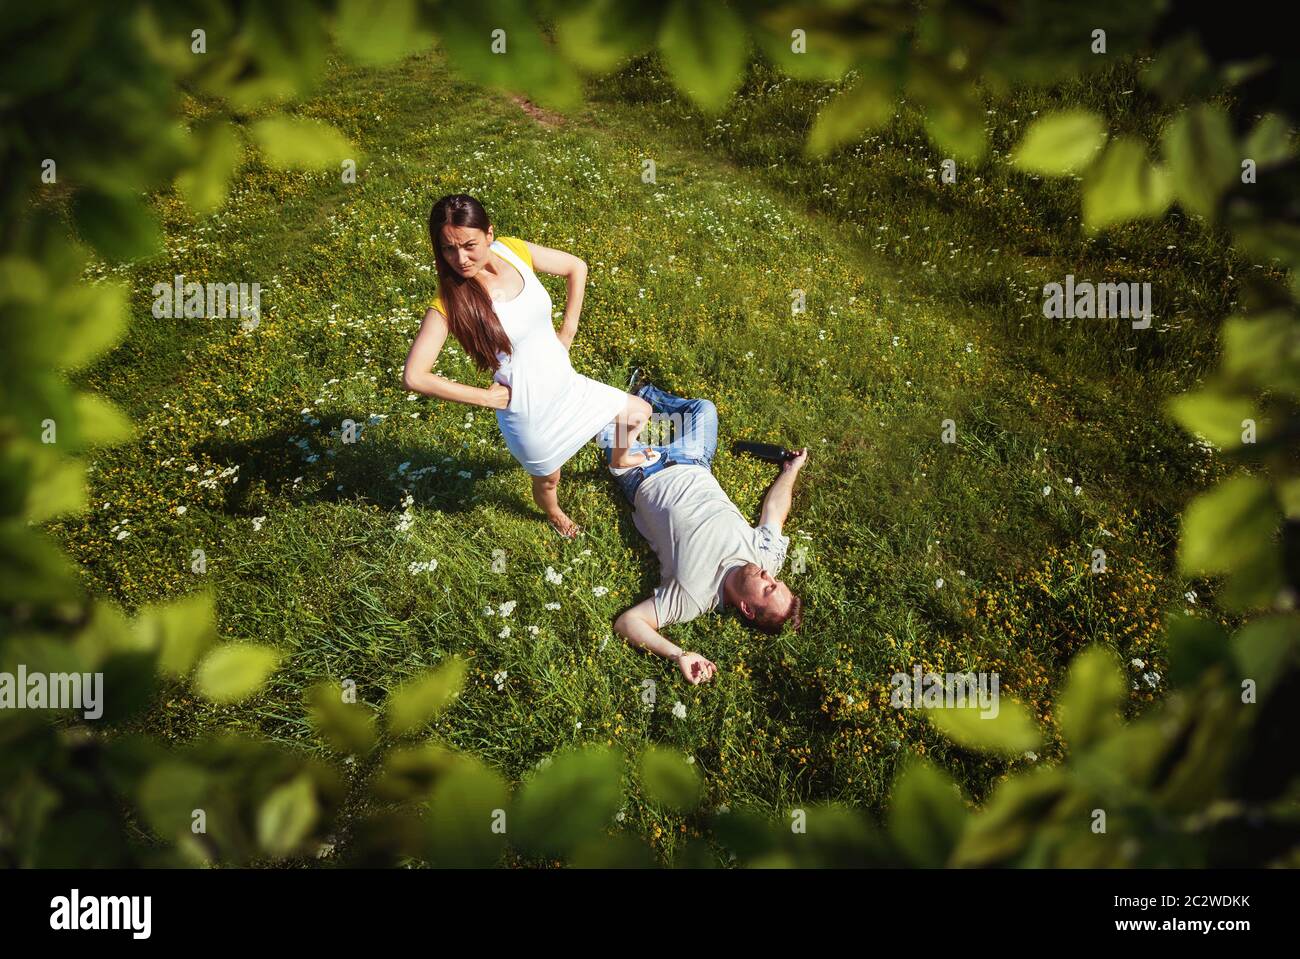 Top view of woman holding her foot on man's body on nature Stock Photo